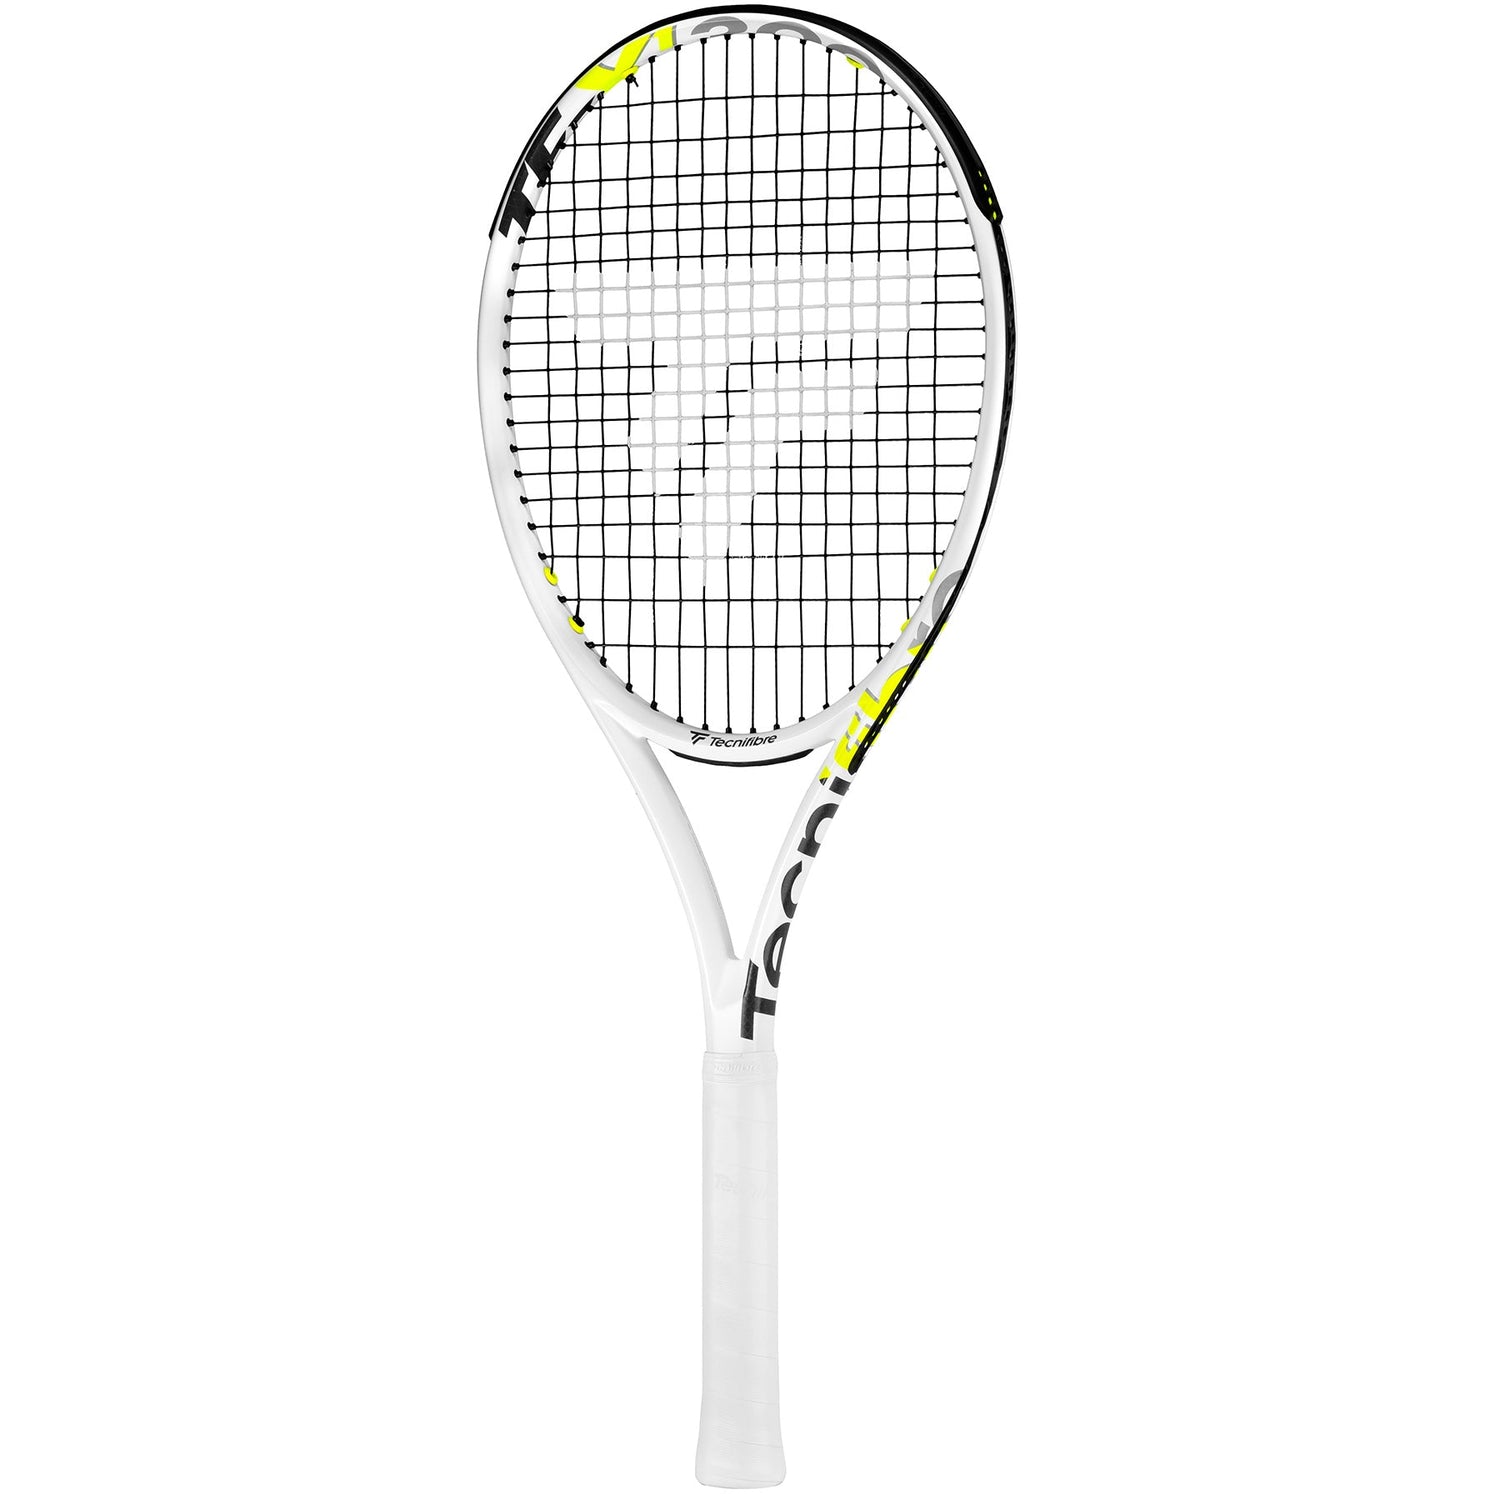 Tecnifibre TF-X1 300 Tennis Racket with White/Black/Neon Yellow color blend